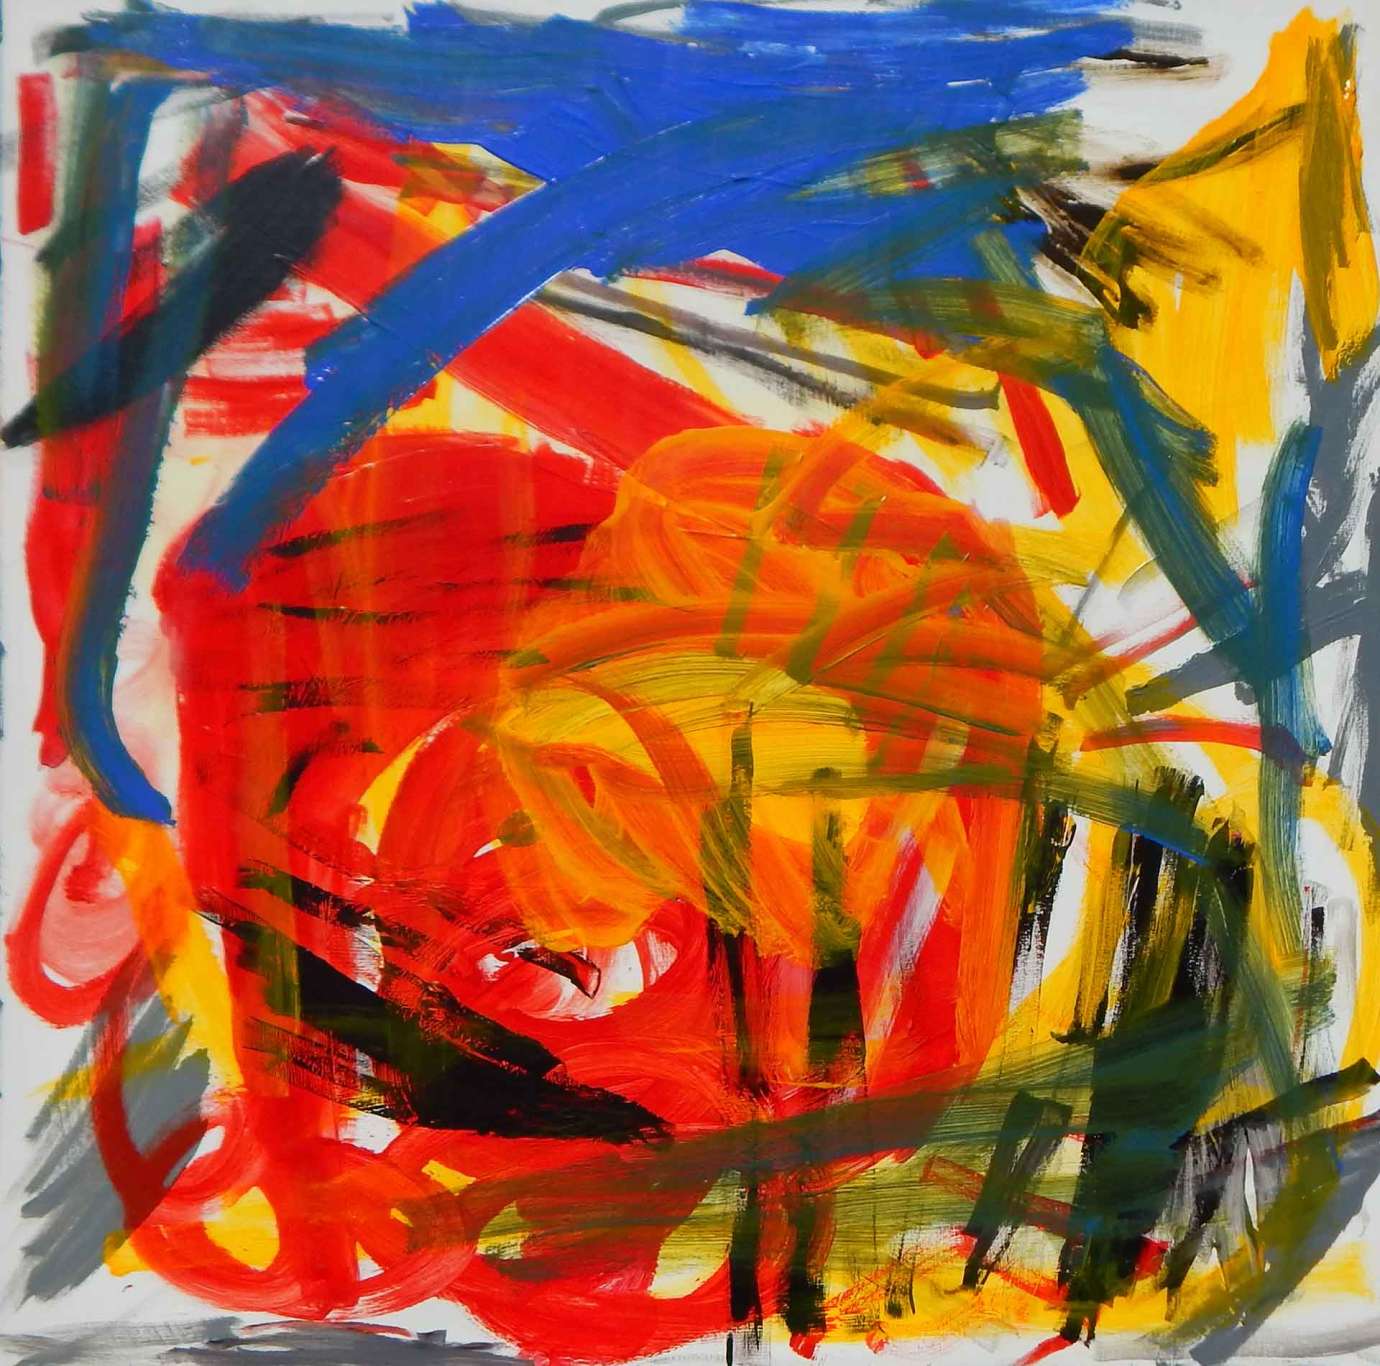 an abstract whirling of brush strokes in black, red, yellow, and blue paint